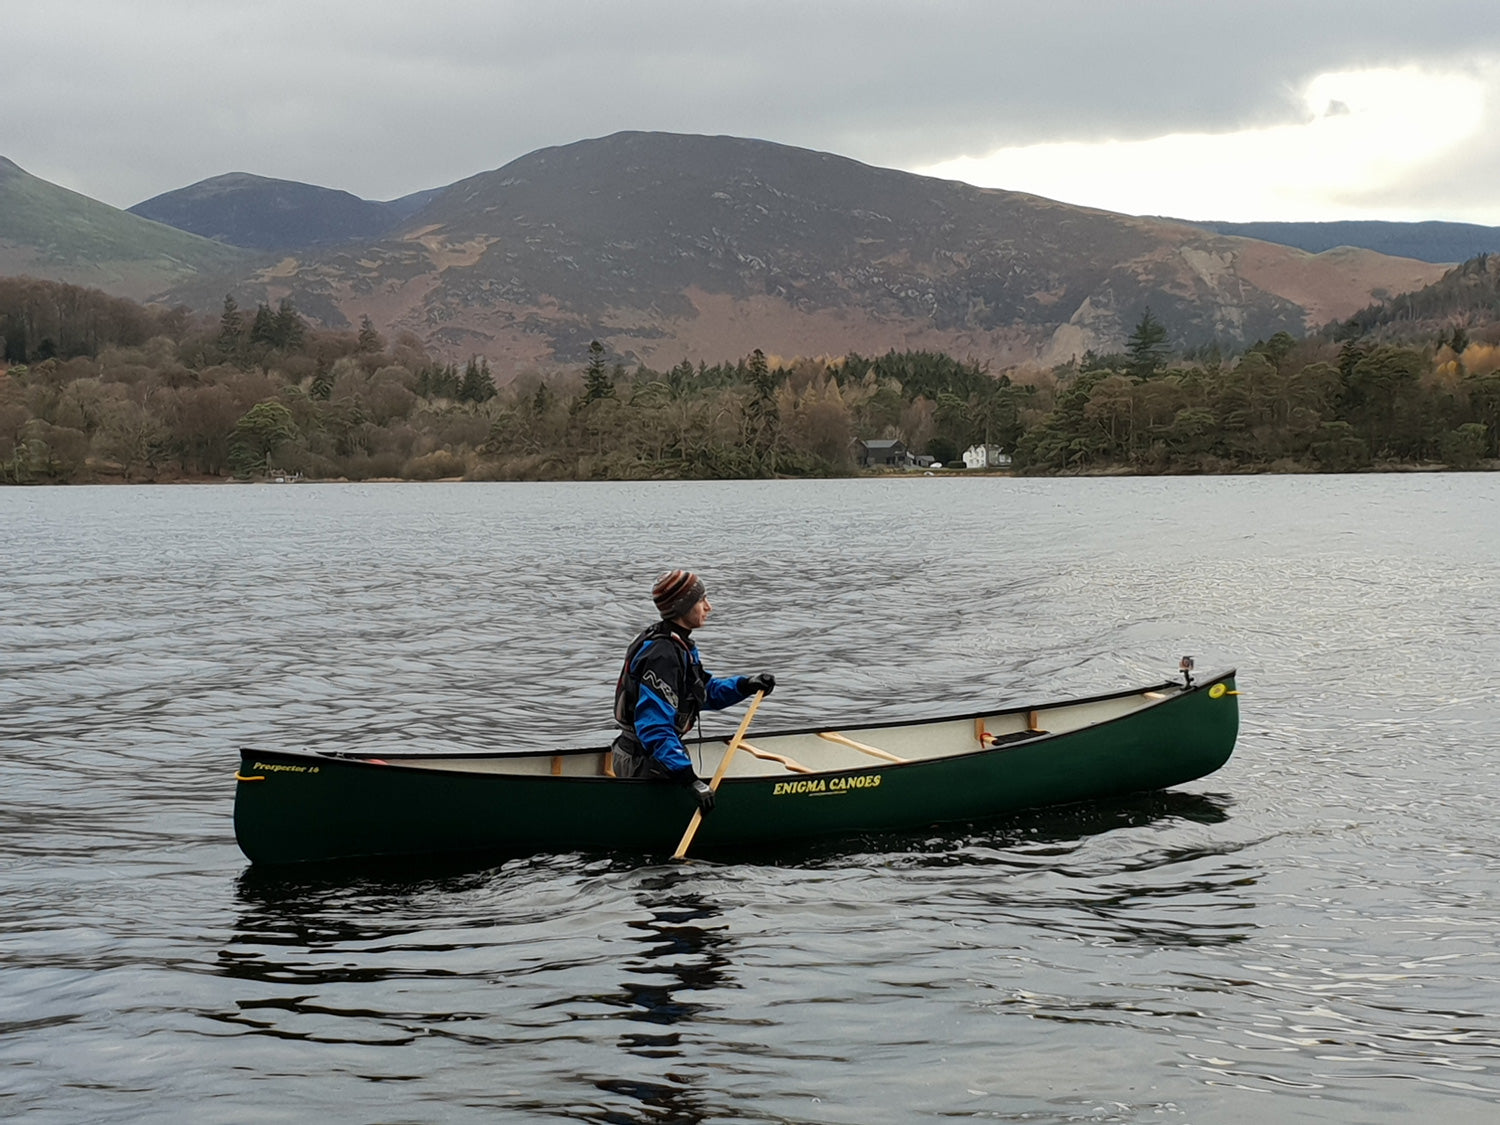 Solo paddling the Enigma Prospector 16 canoe on a lake